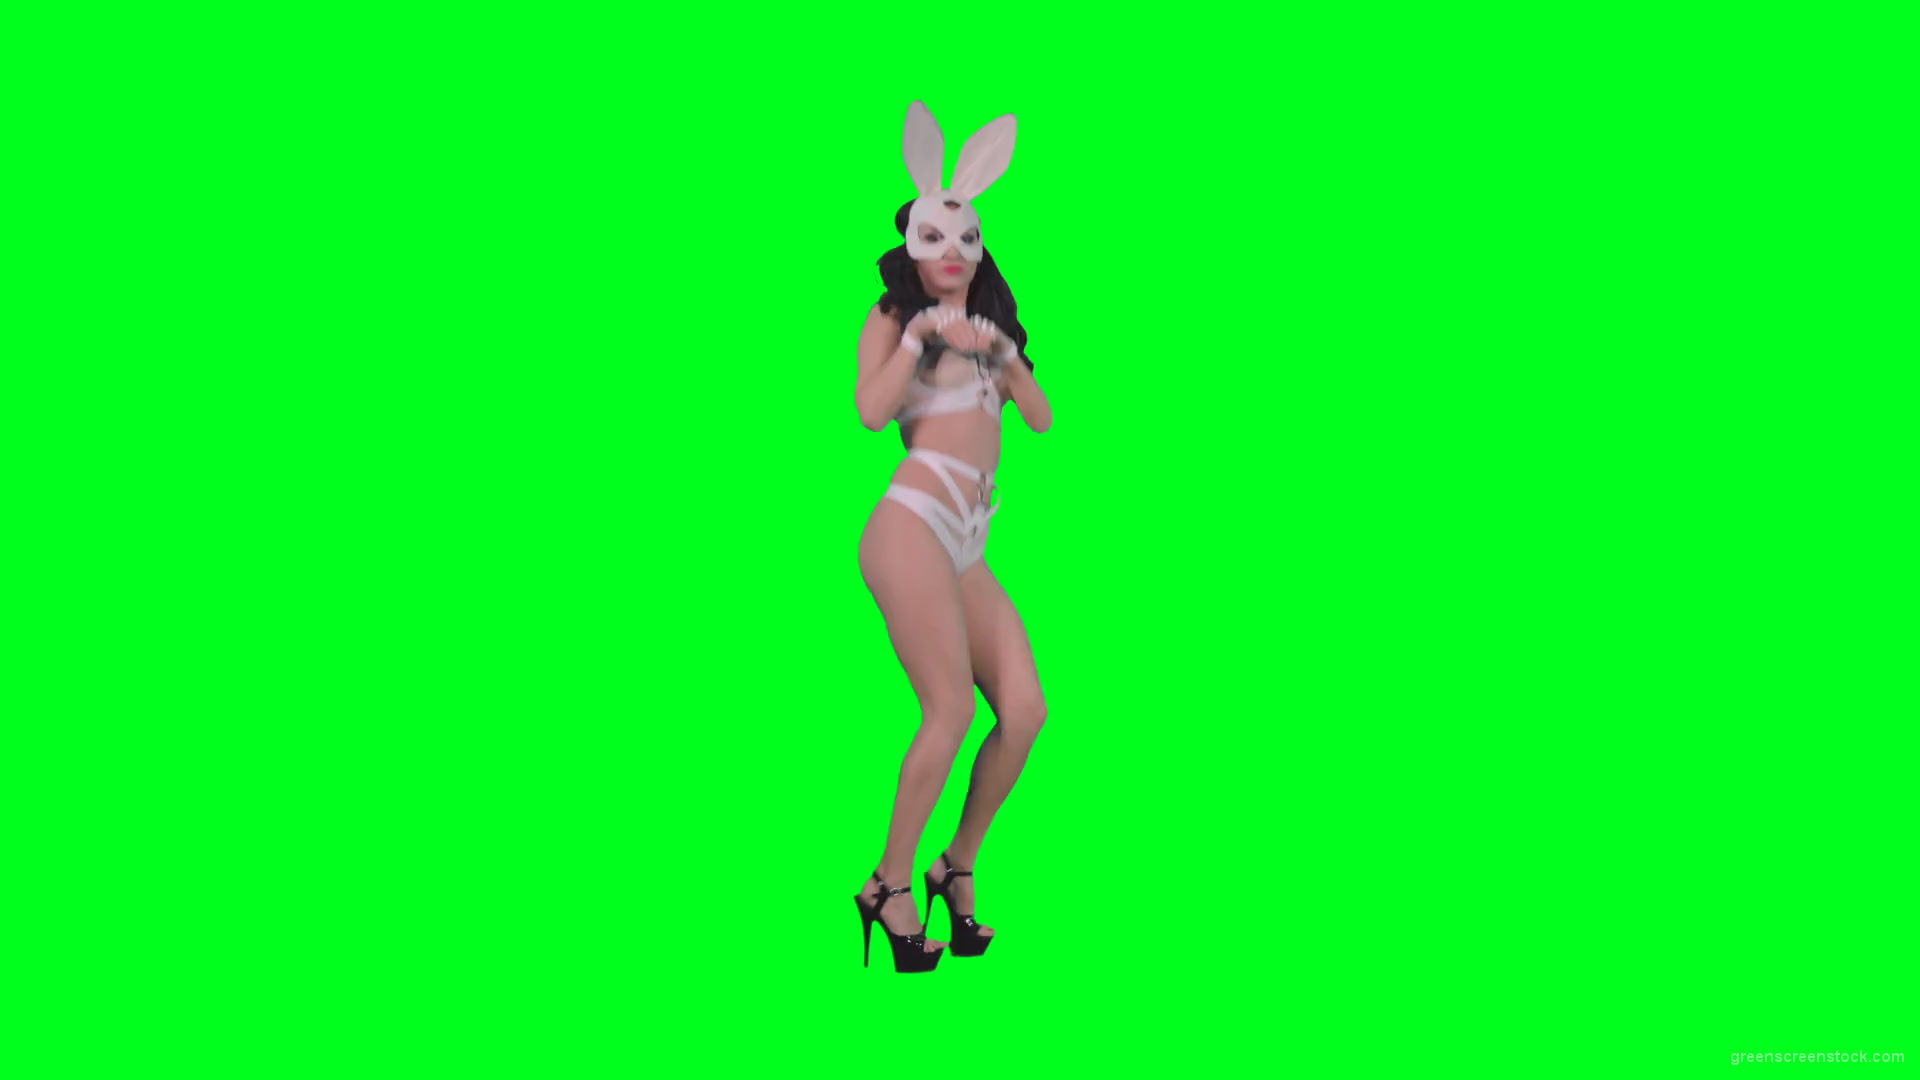 Young-girl-in-rabbit-costume-jumping-and-spinning-on-green-screen-4K-Video-Footage-1920_001 Green Screen Stock